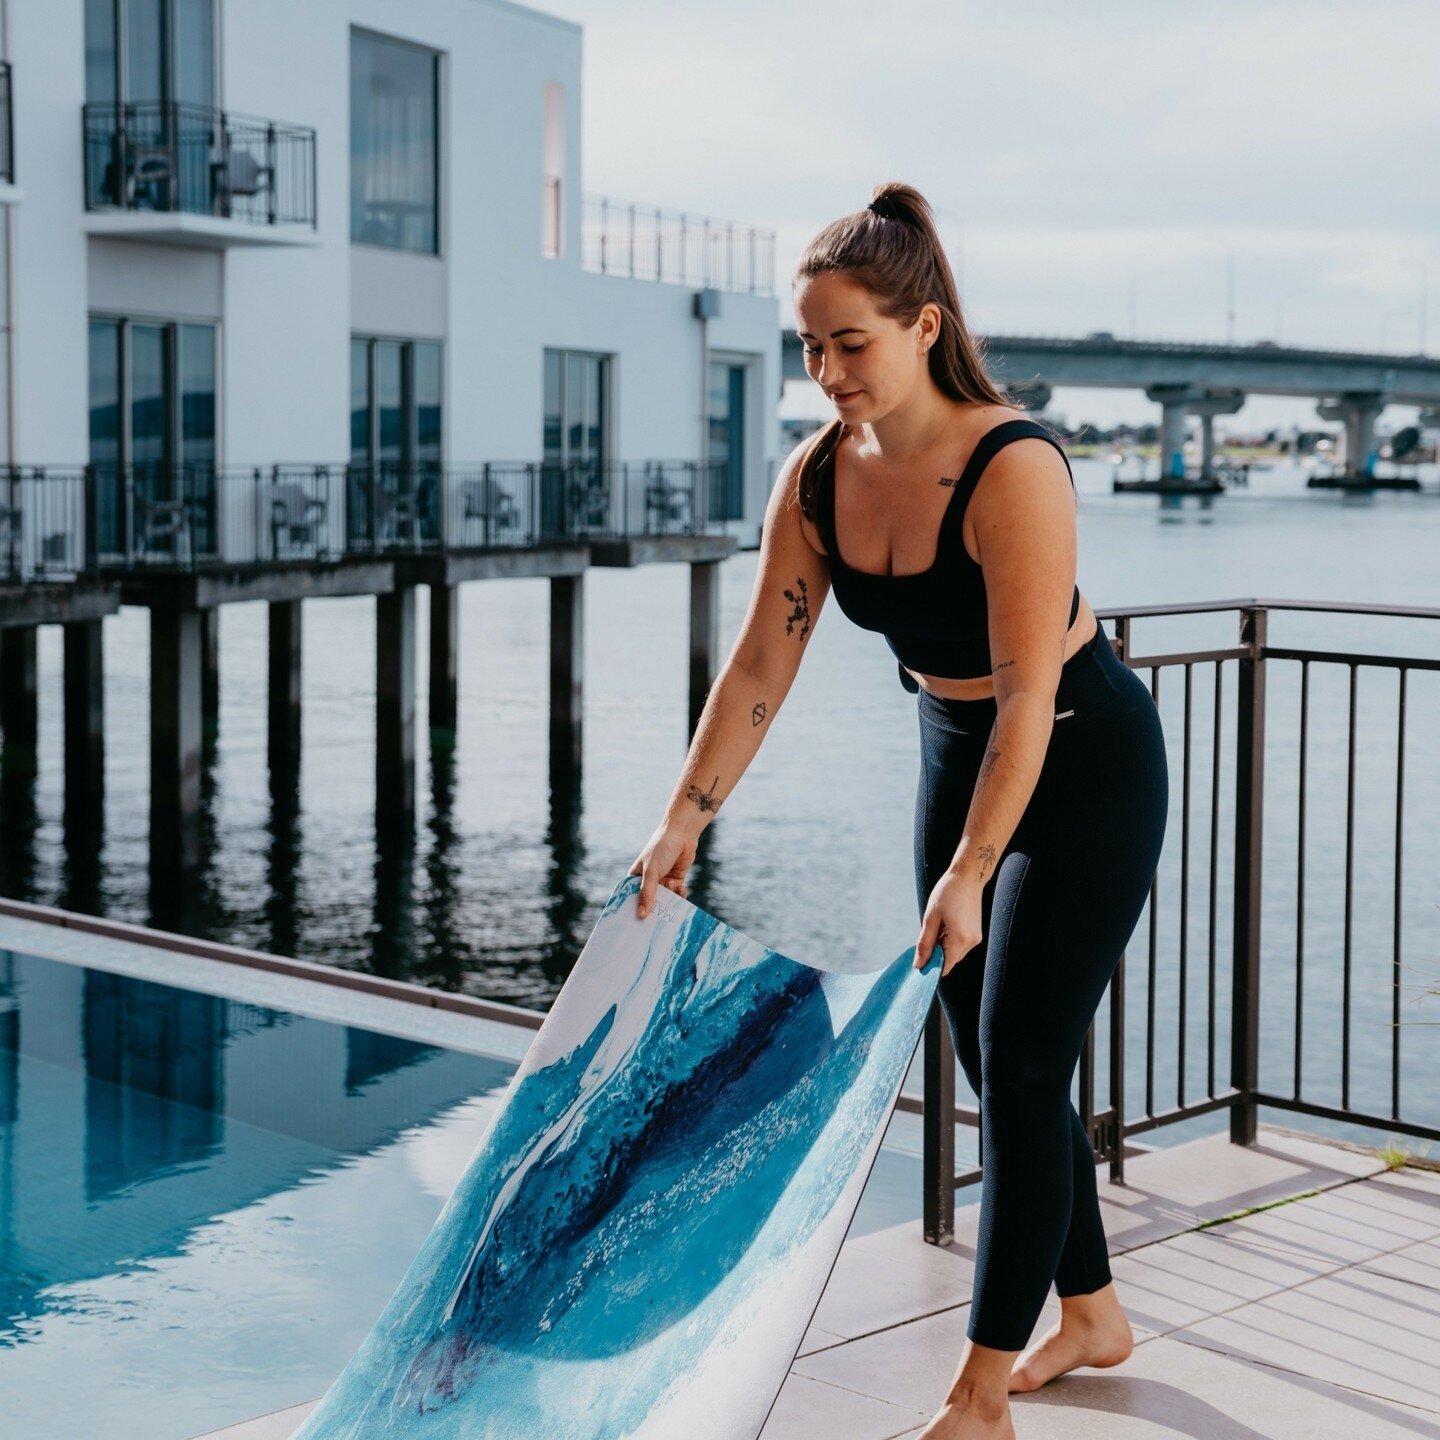 Roll out a yoga mat that reflects the beautiful surroundings of Trinity Wharf 🌊

@thematcollective
.
.
.
#yoga #yogamat #travel #resort #yogawithaview #poolsideyoga #holidaymode #waterview #infinitypool